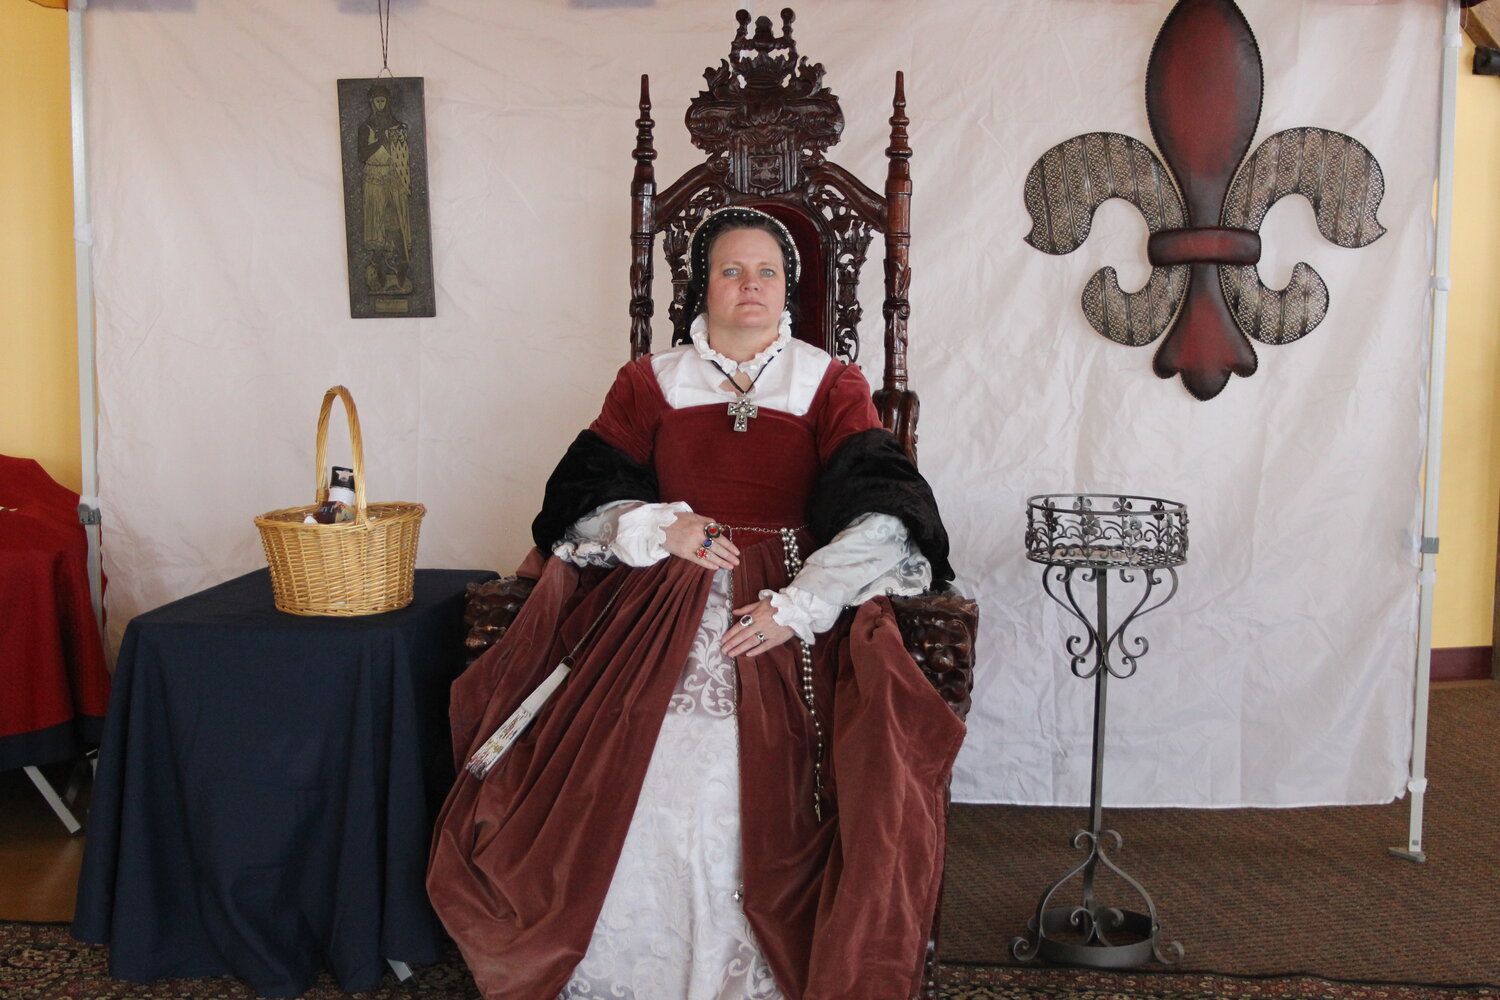 Robyn Rawlins from Utah portrays Queen Mary of England and Spain in the upstairs loft in the Roundhouse, where the children’s games are held. She is with the Utah Renaissance Faire which is held in August.